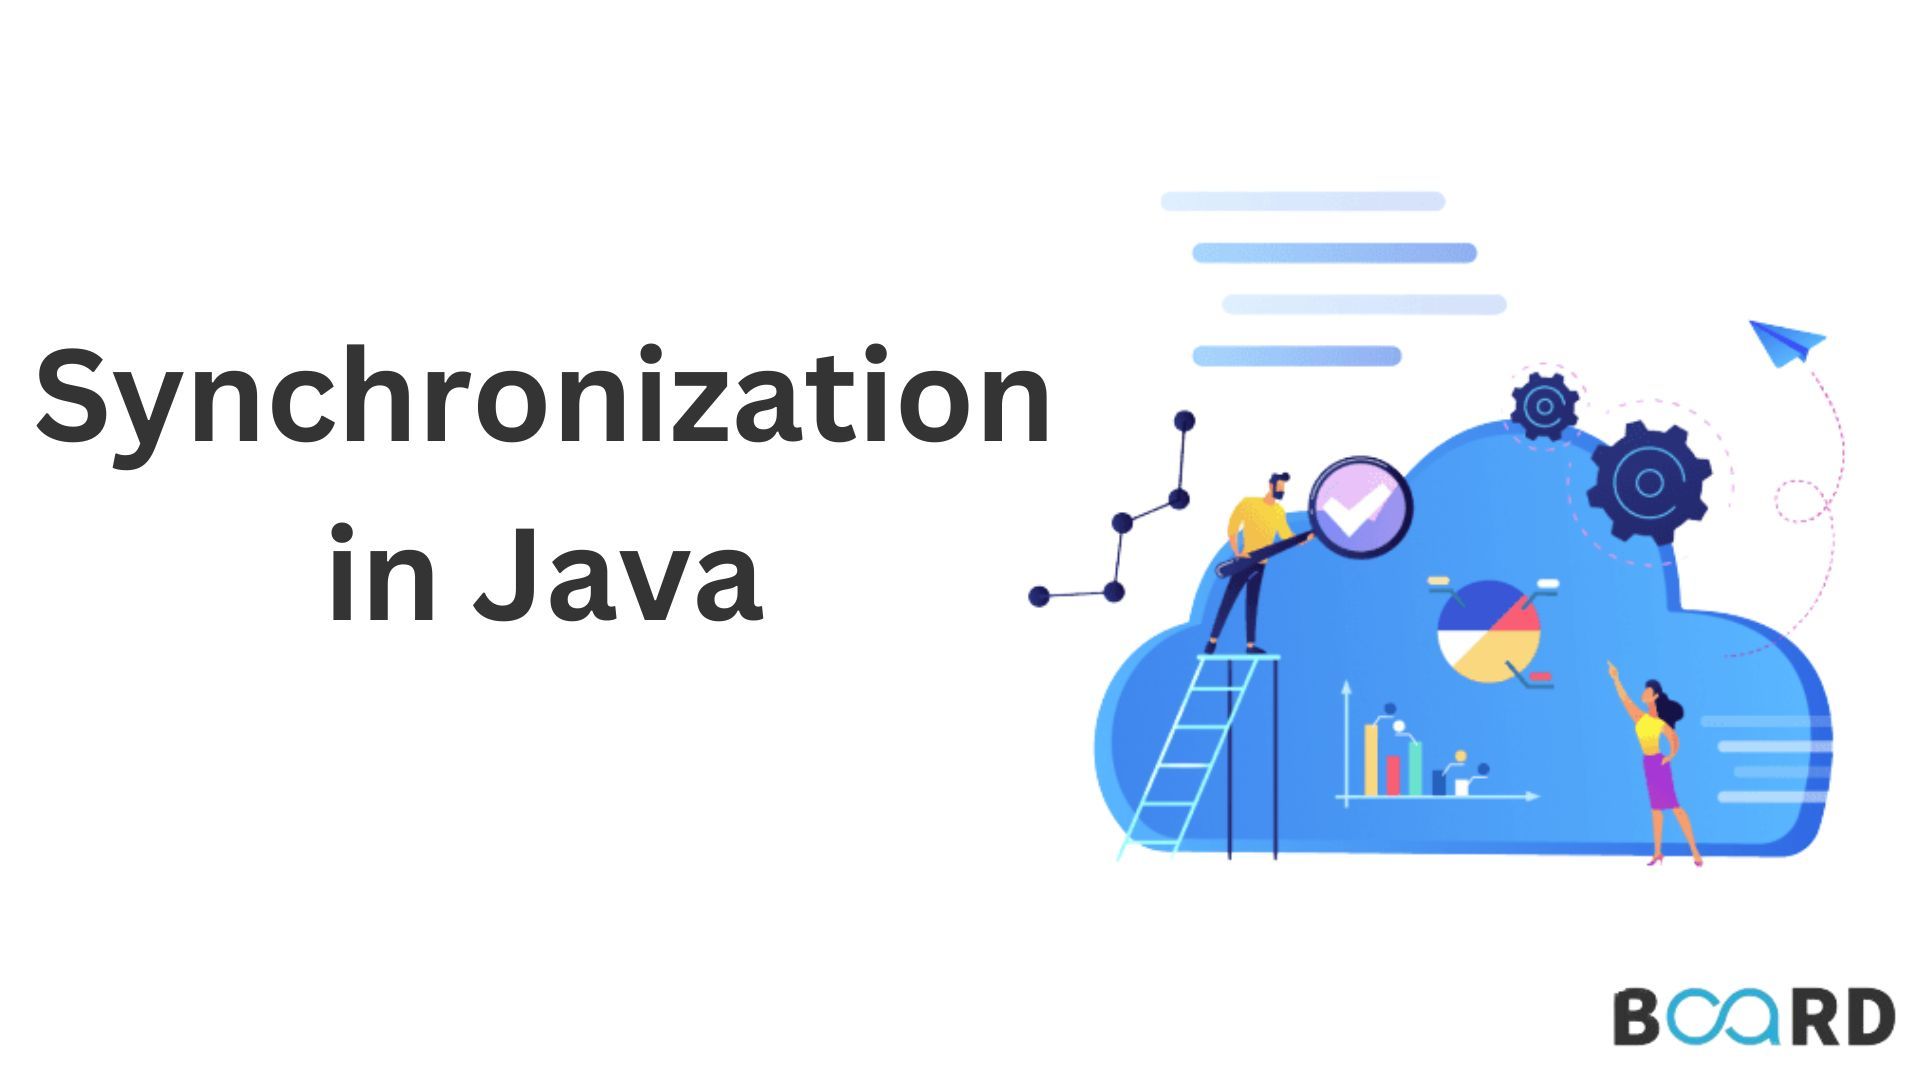 A practical guide on Synchronization in Java